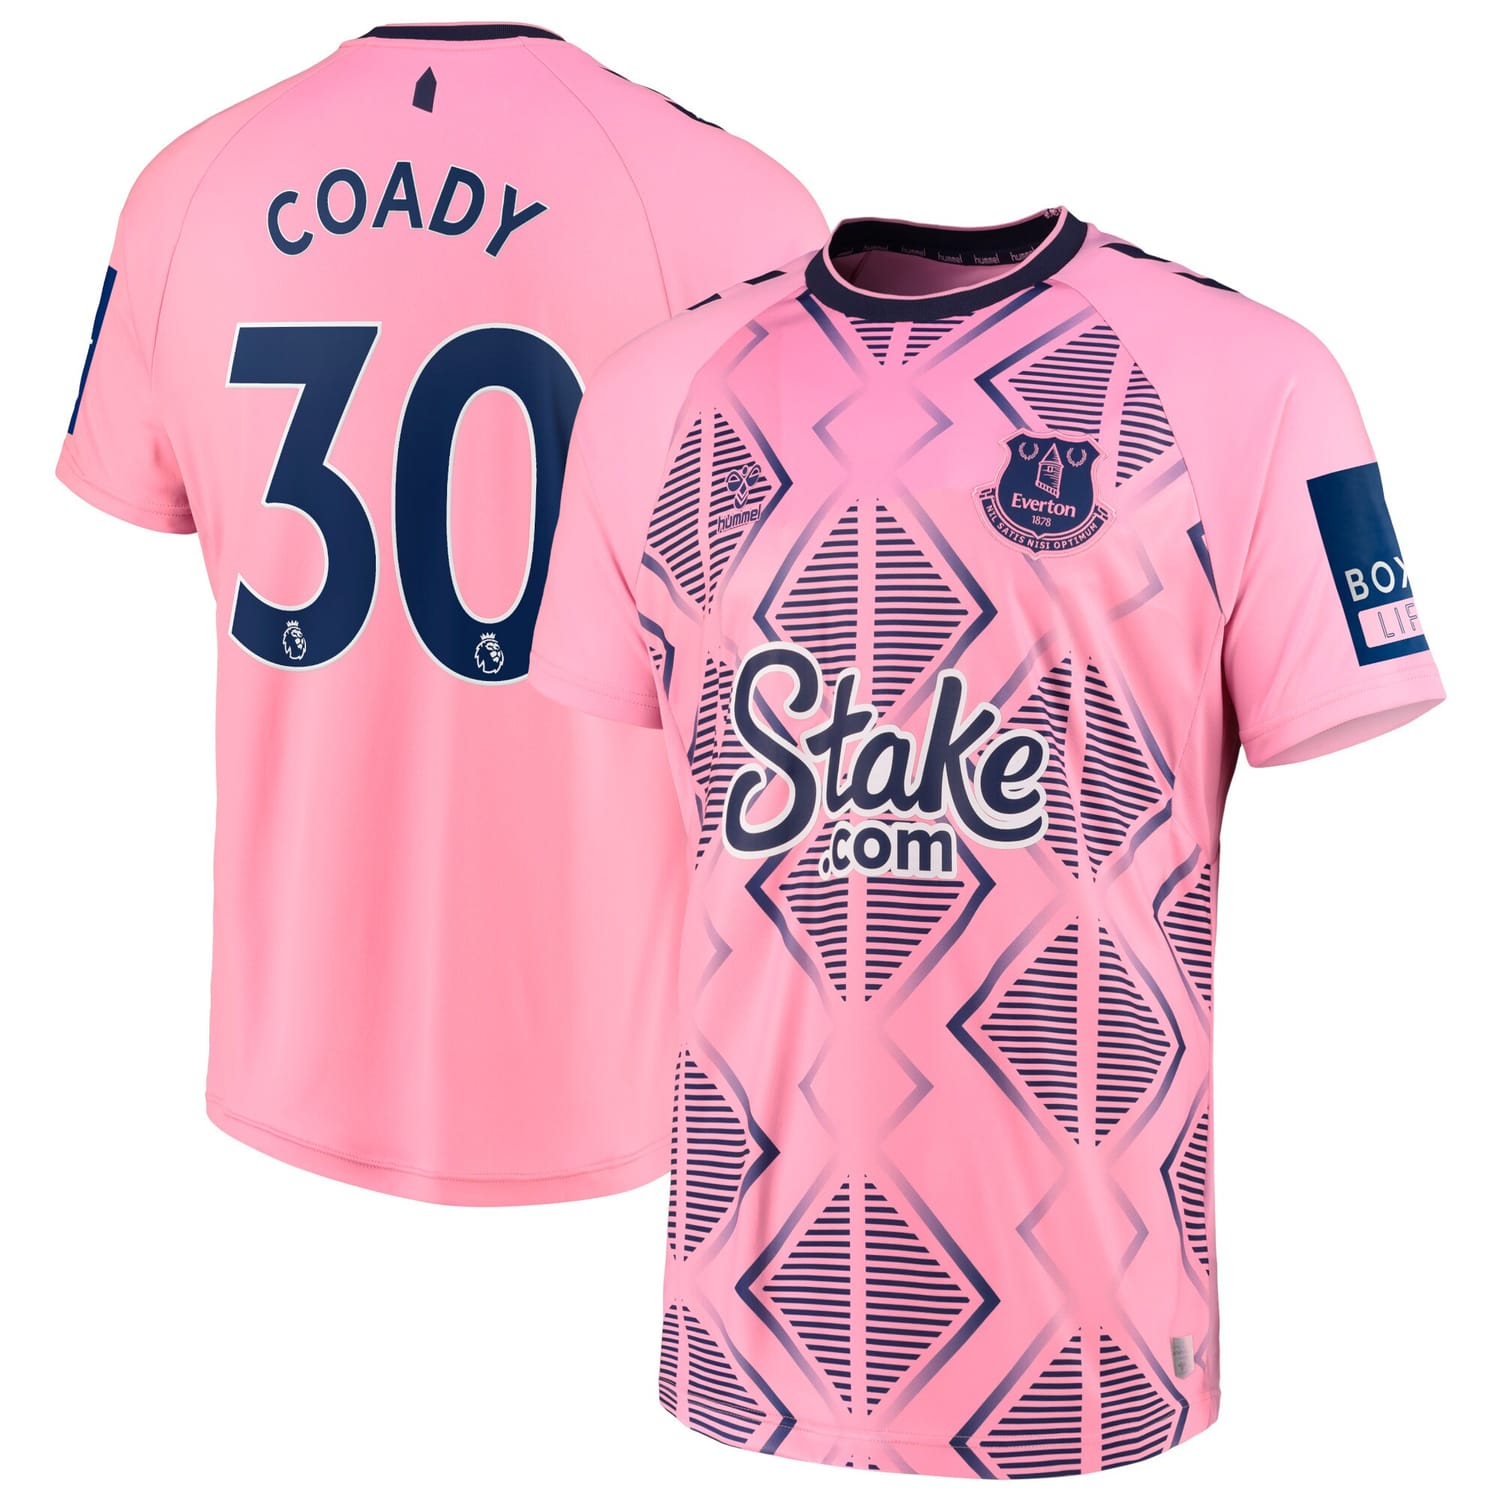 Premier League Everton Away Jersey Shirt 2022-23 player Conor Coady 30 printing for Men